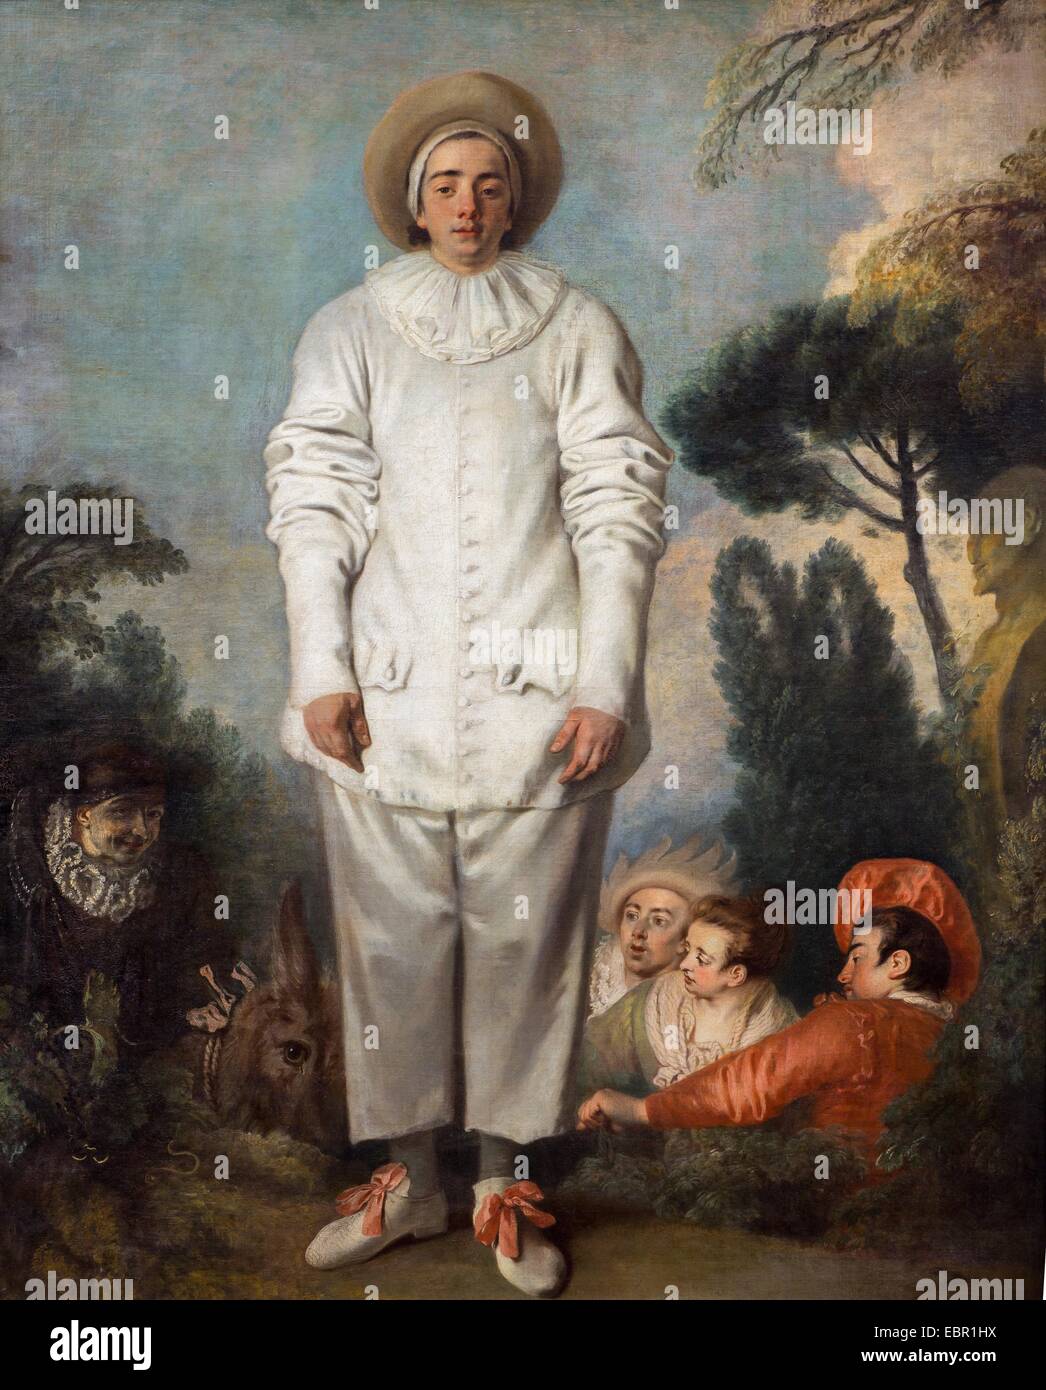 ActiveMuseum 0001886.jpg / Pierrot formerly known as Gilles, 1718 - Jean-Antoine Watteau 25/09/2013  -   / 18th century Collection / Active Museum Stock Photo